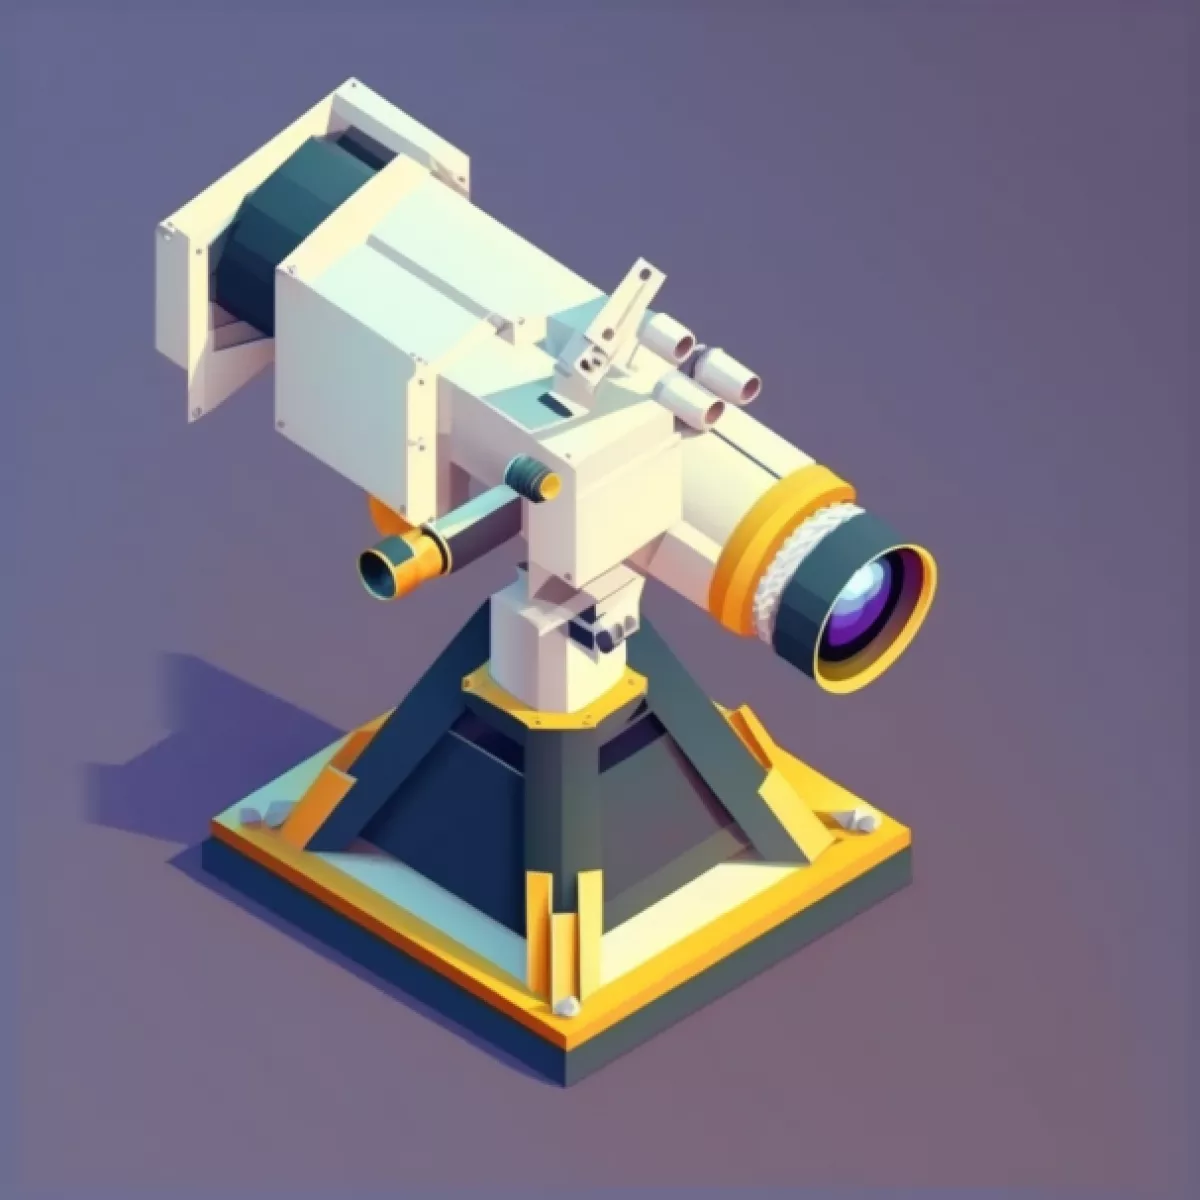 DEADRINGER Isometric high powered expensive telescope 26f6abff e279 4892 a0af 666b4c23a5fa